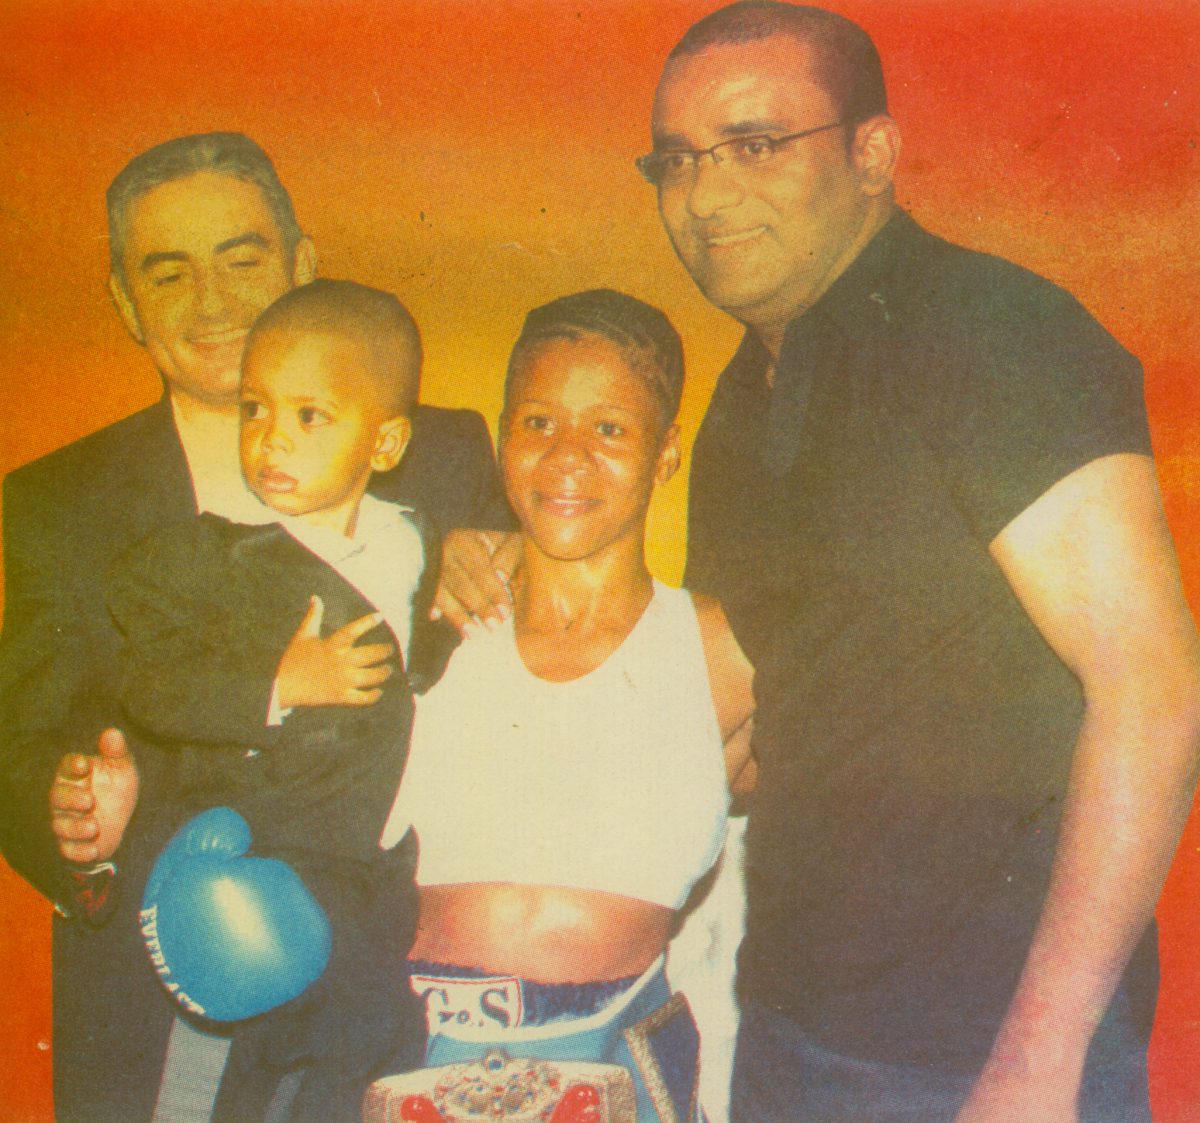 Shondell Alfred with her son, then President of Guyana Bharrat Jagdeo and Muharam Kulekei, General Manager of Princess Hotel, following her successful title defence against Corinne De Groot in 2010.
